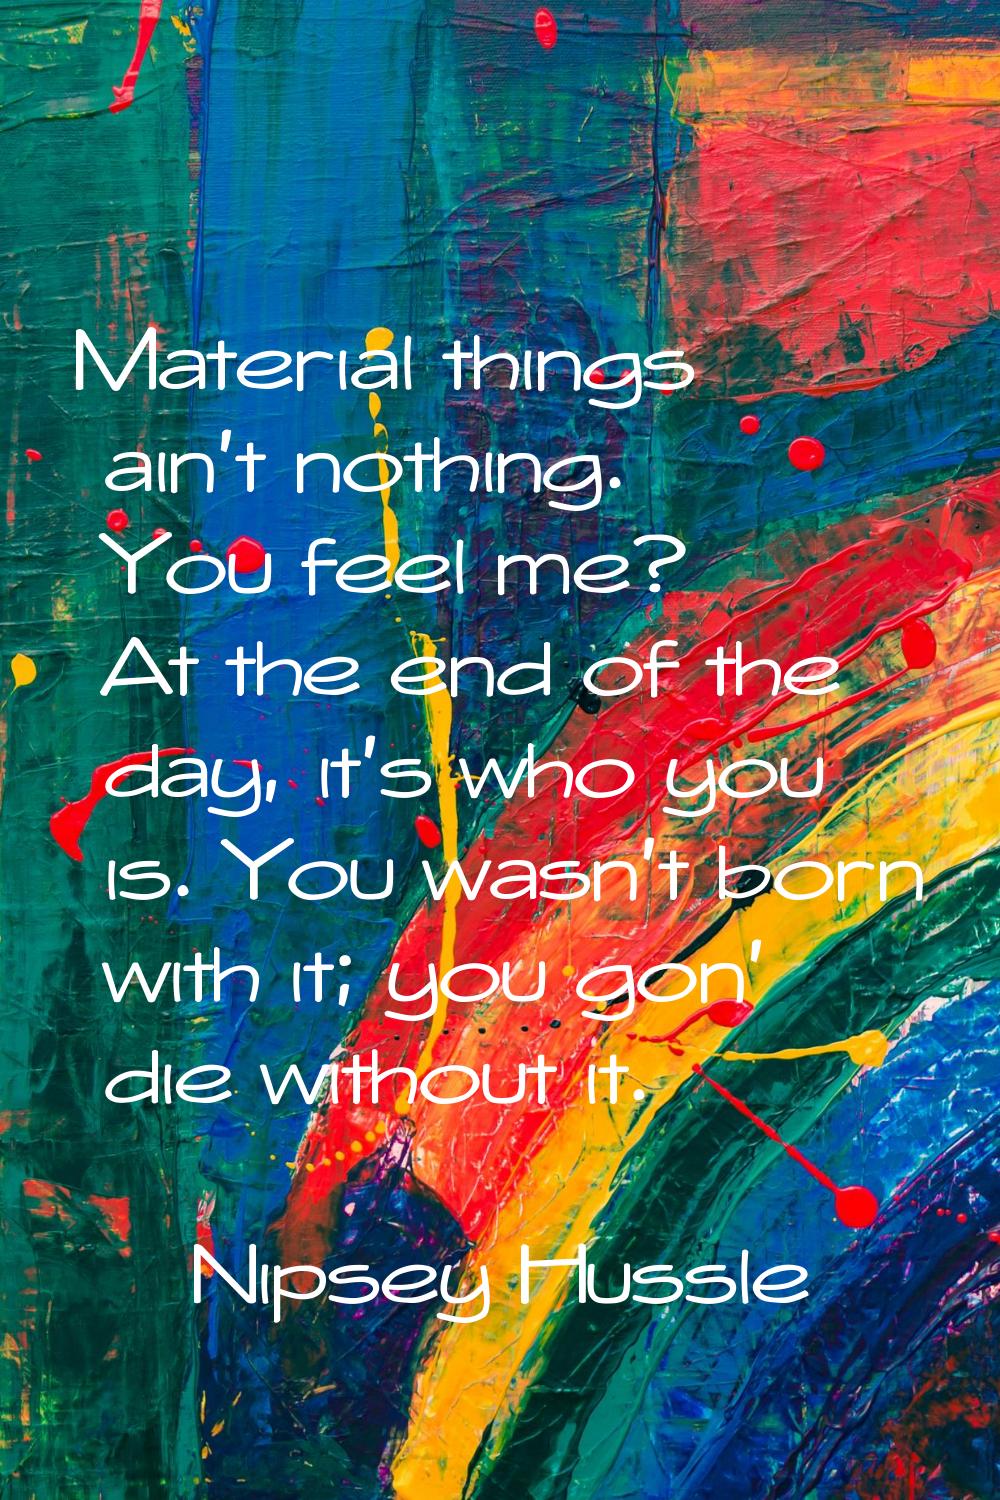 Material things ain't nothing. You feel me? At the end of the day, it's who you is. You wasn't born